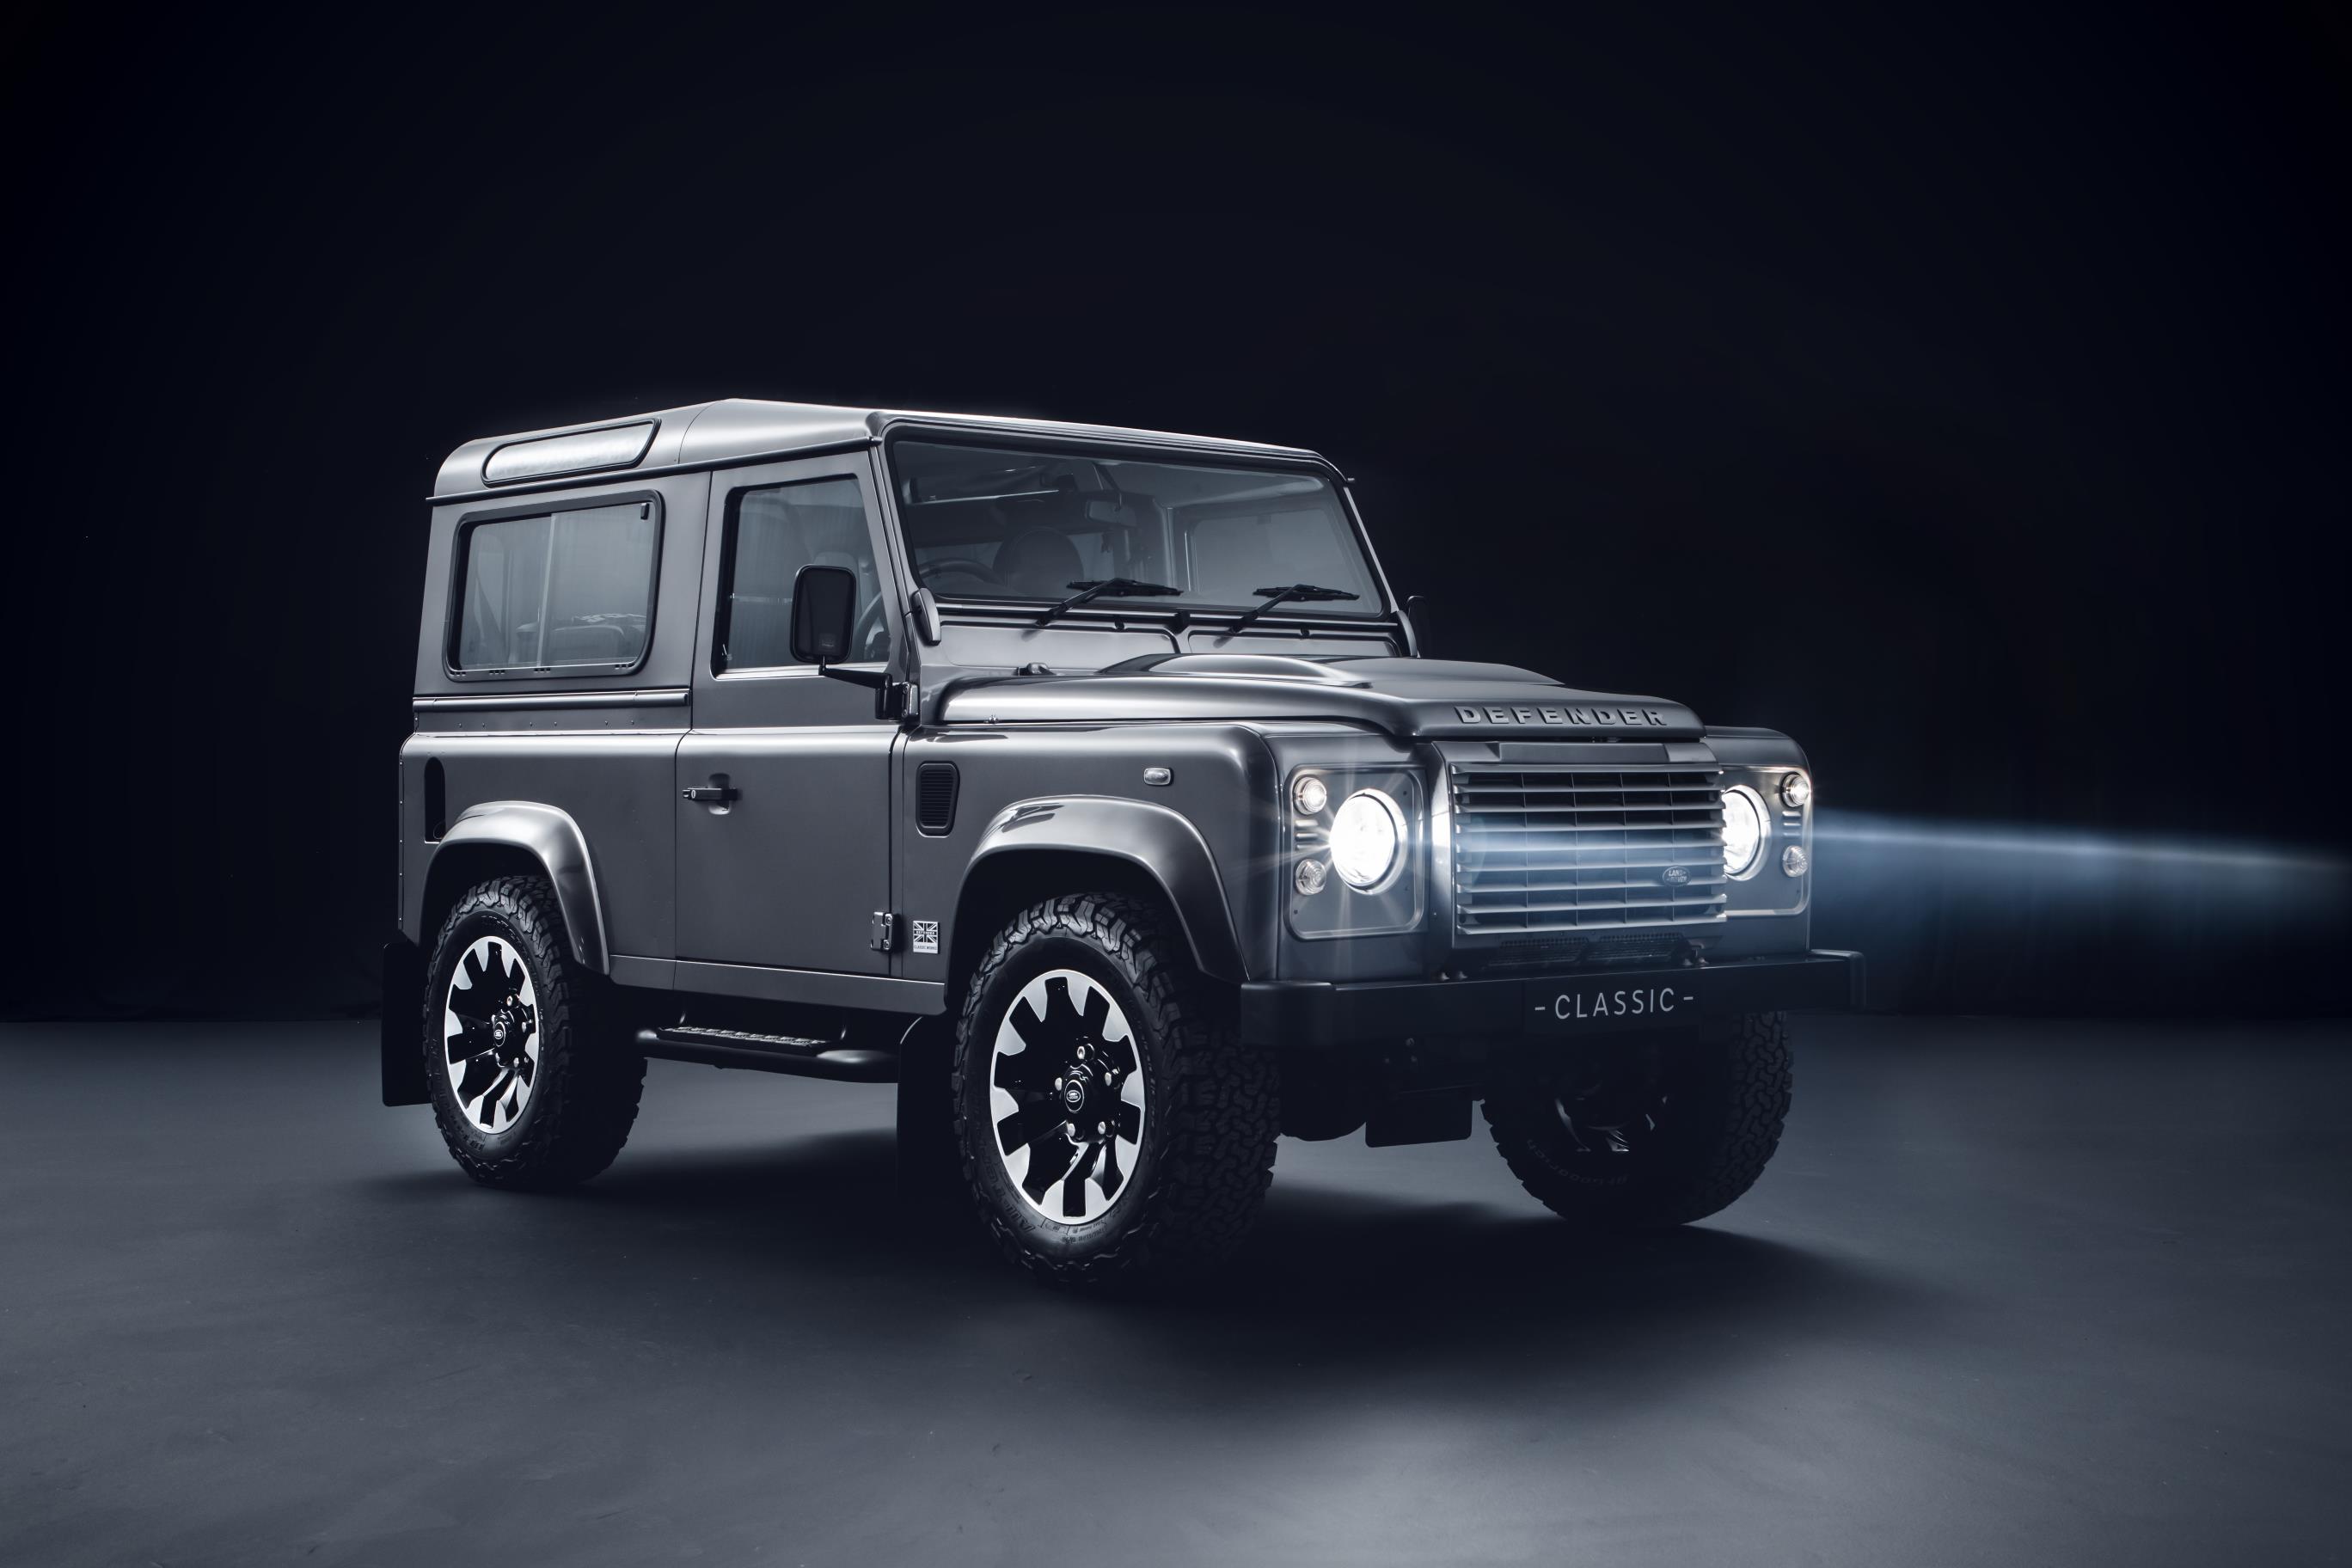 The classic Defender is hard to miss